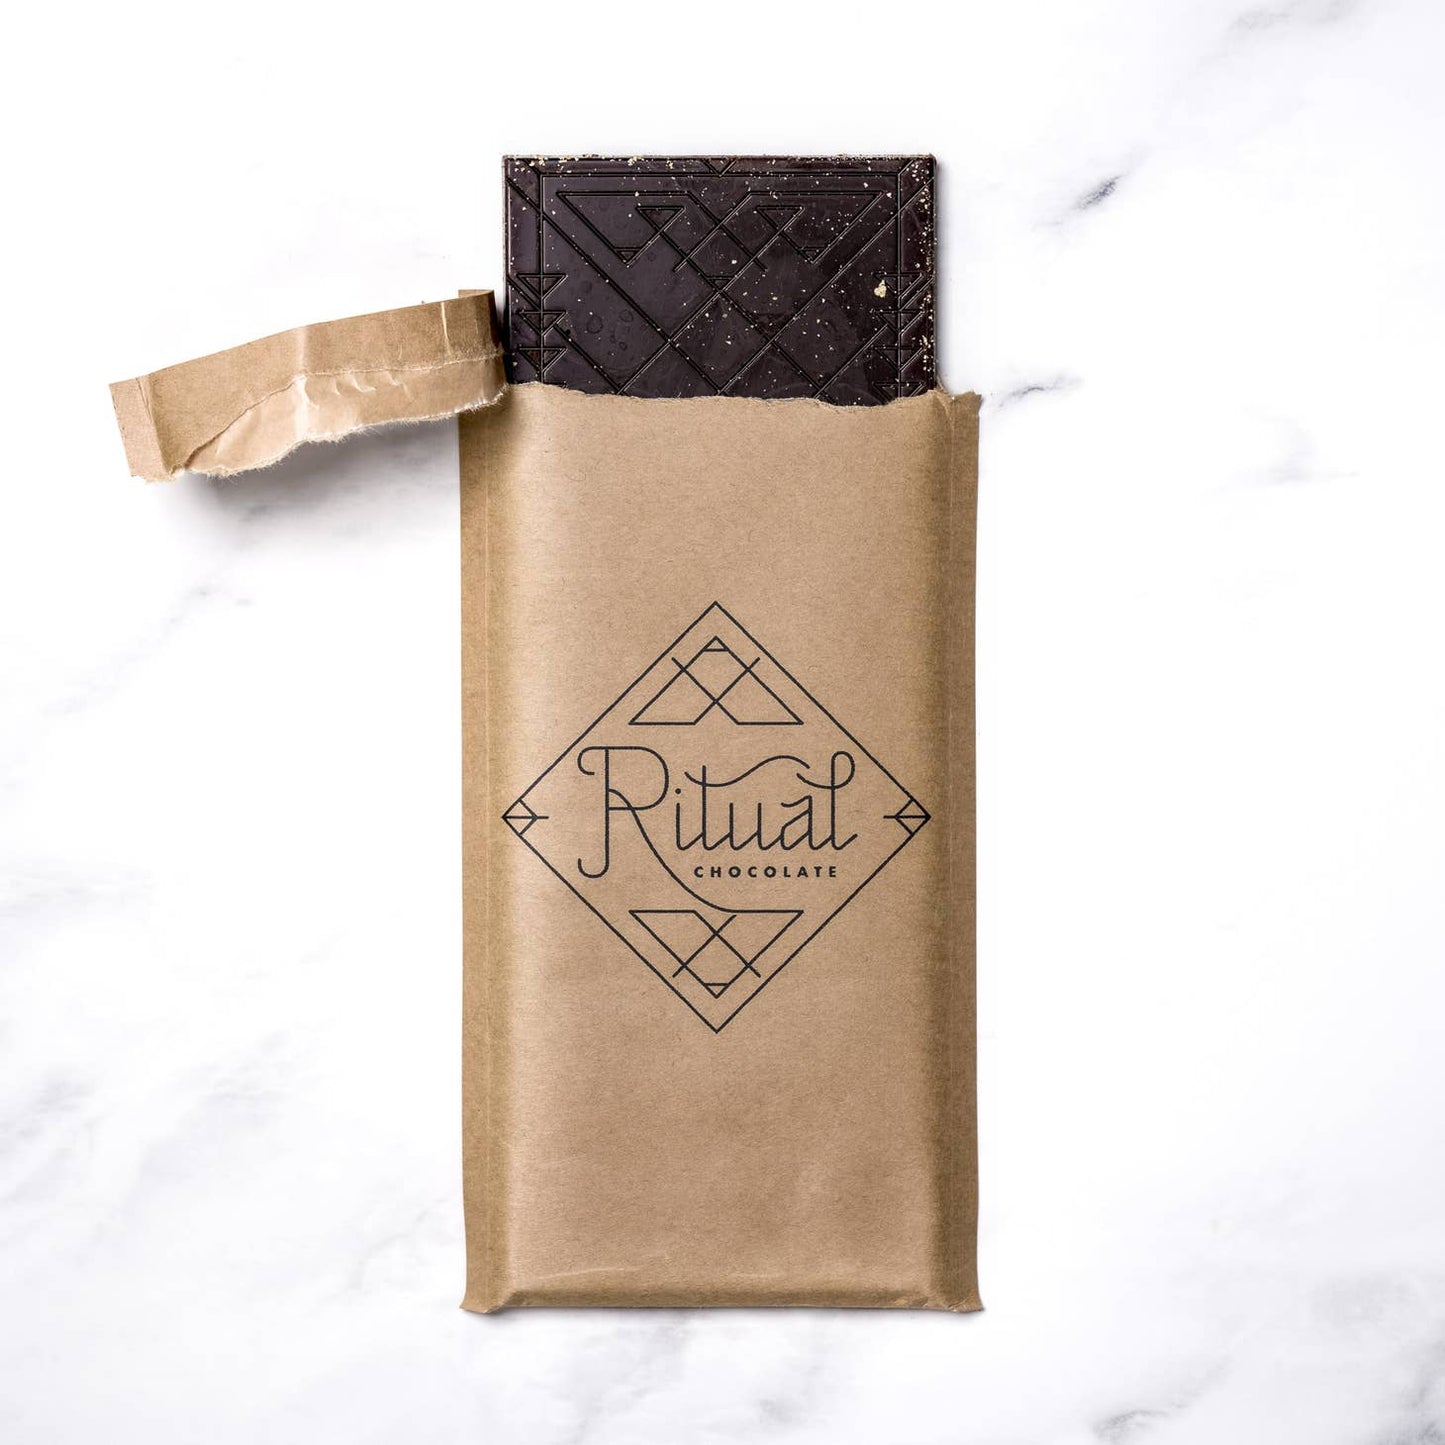 Ritual Chocolate - Mid Mountain Blend, 70% Cacao